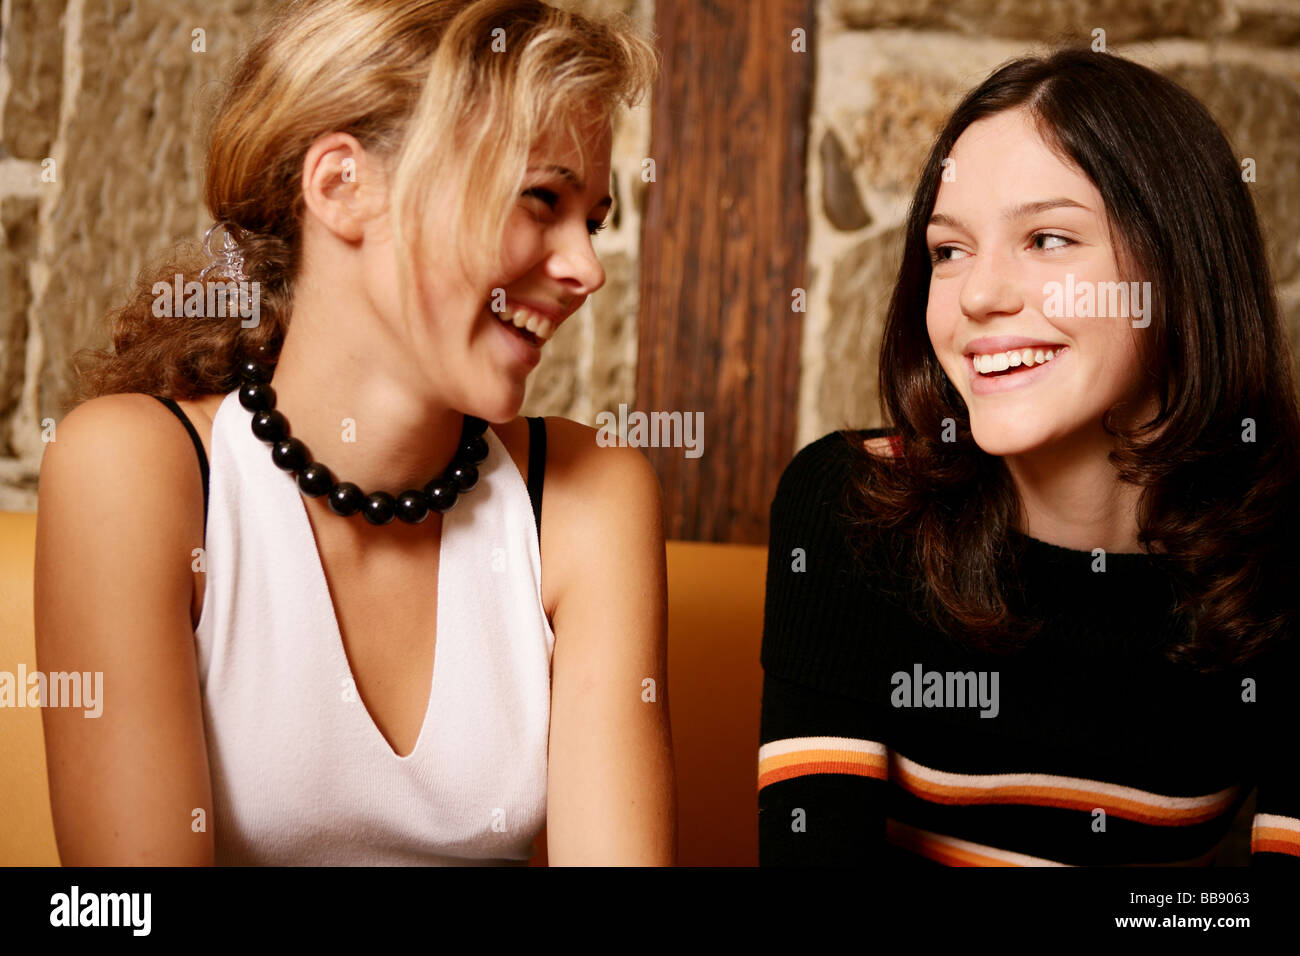 Portrait of teenager girls laughing in a restaurant Stock Photo